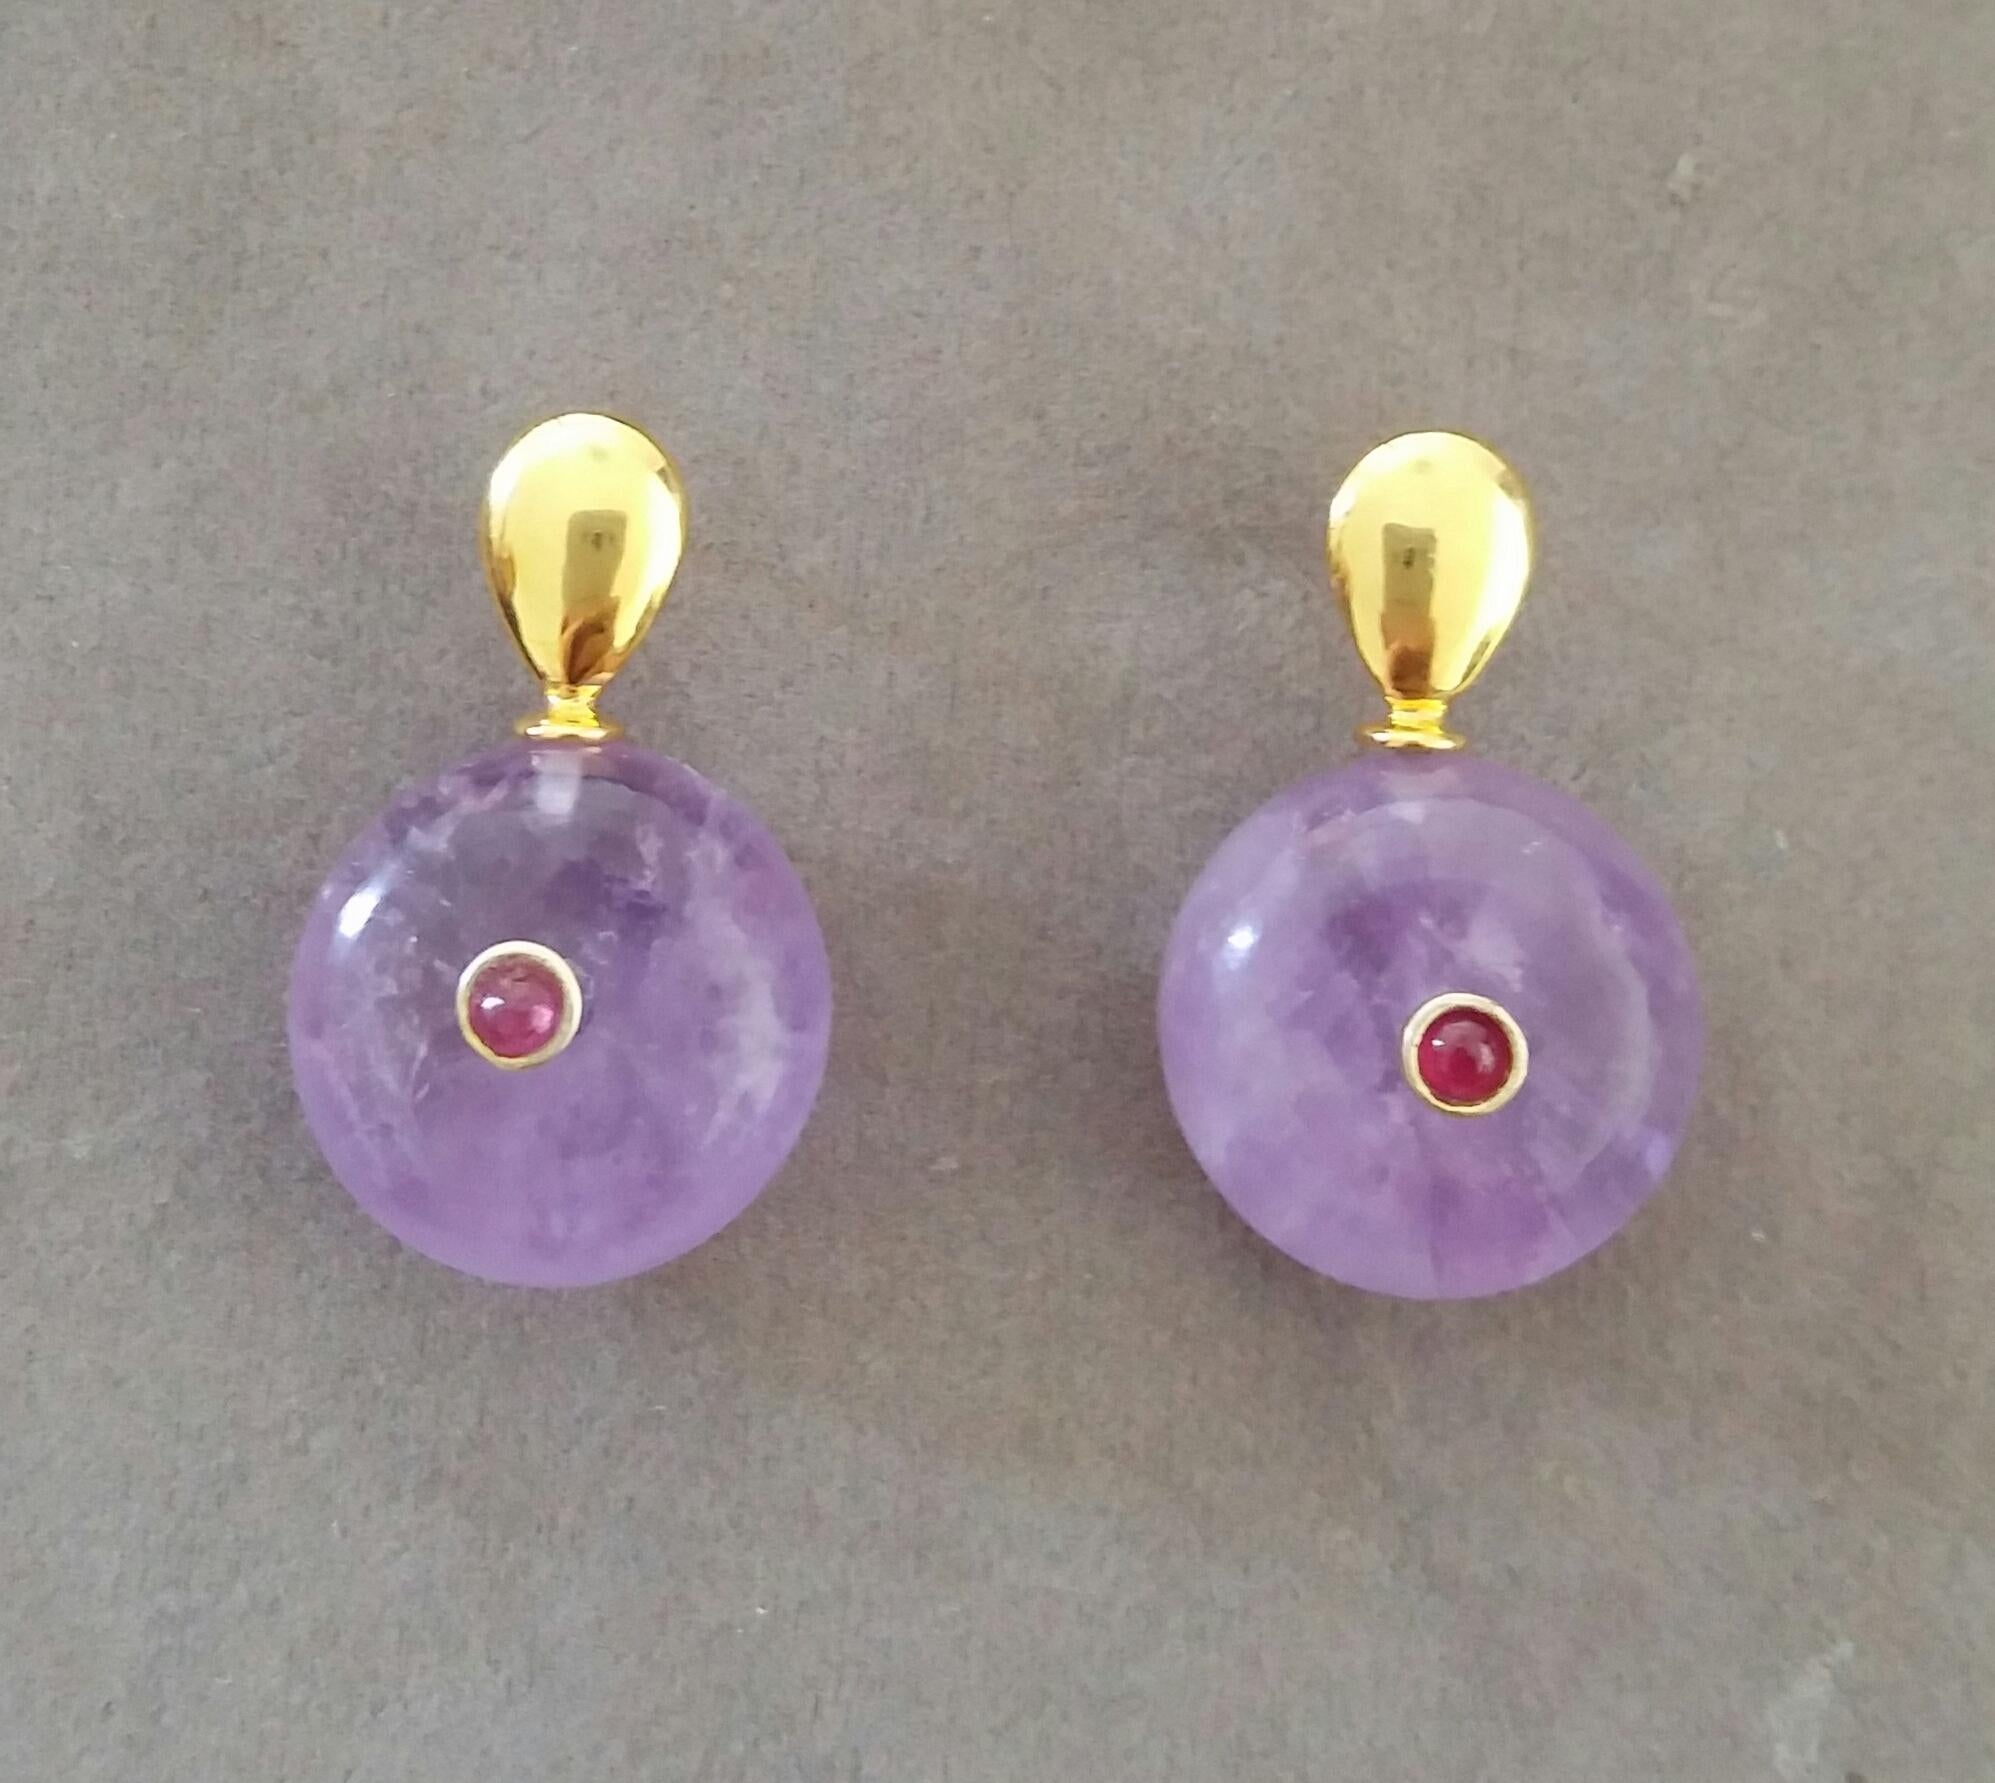 Simple chic stud earrings with a pair of Oval Cut Amethyst measuring 8mm x10 mm set in solid 14 Kt. yellow gold on the top and in the lower parts 2 Round Plain Wheel Shape Amethyst  16 mm .in diameter with a small round Ruby cab in the center
In